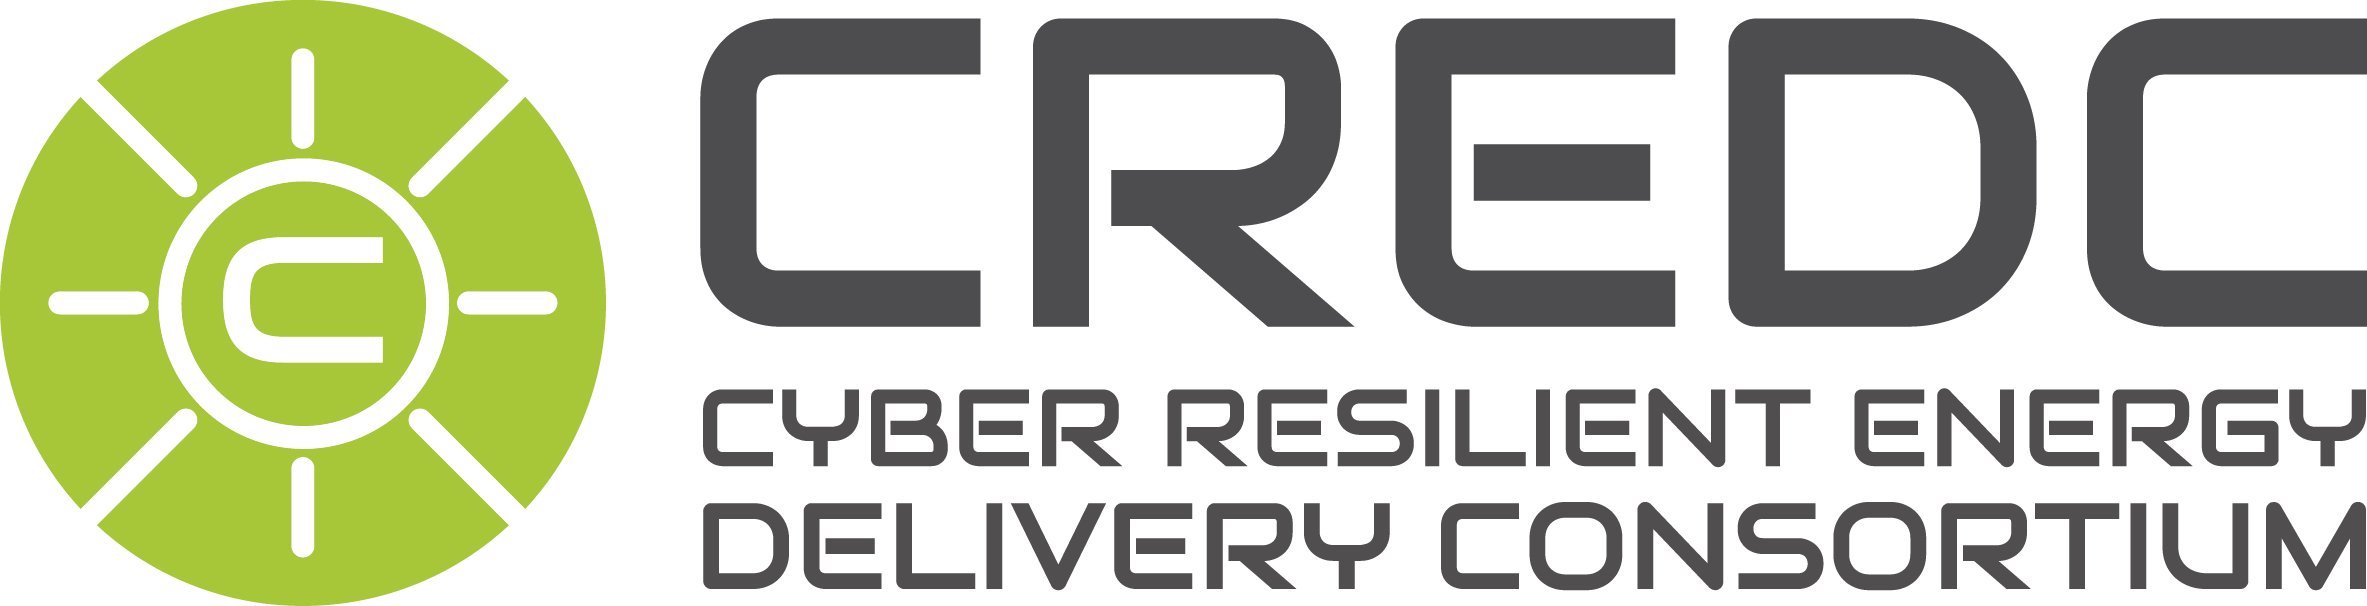 Cyber Resilient Energy Delivery Consortium